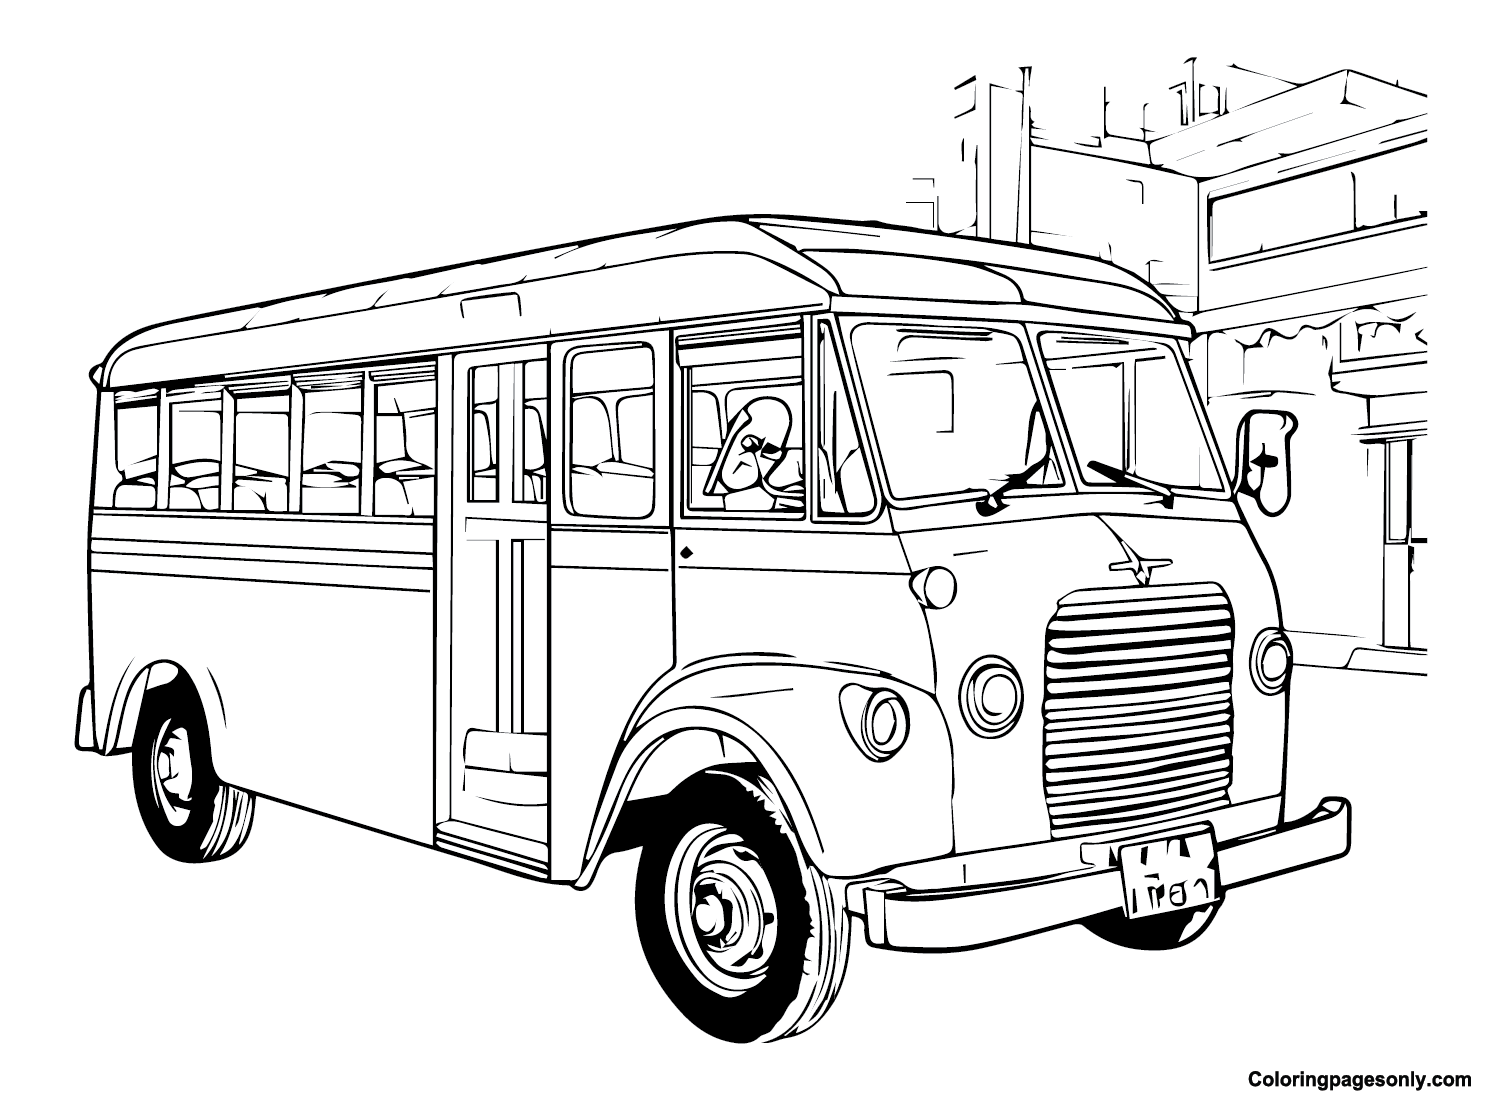 Jeepney Philippines Images Coloring Pages